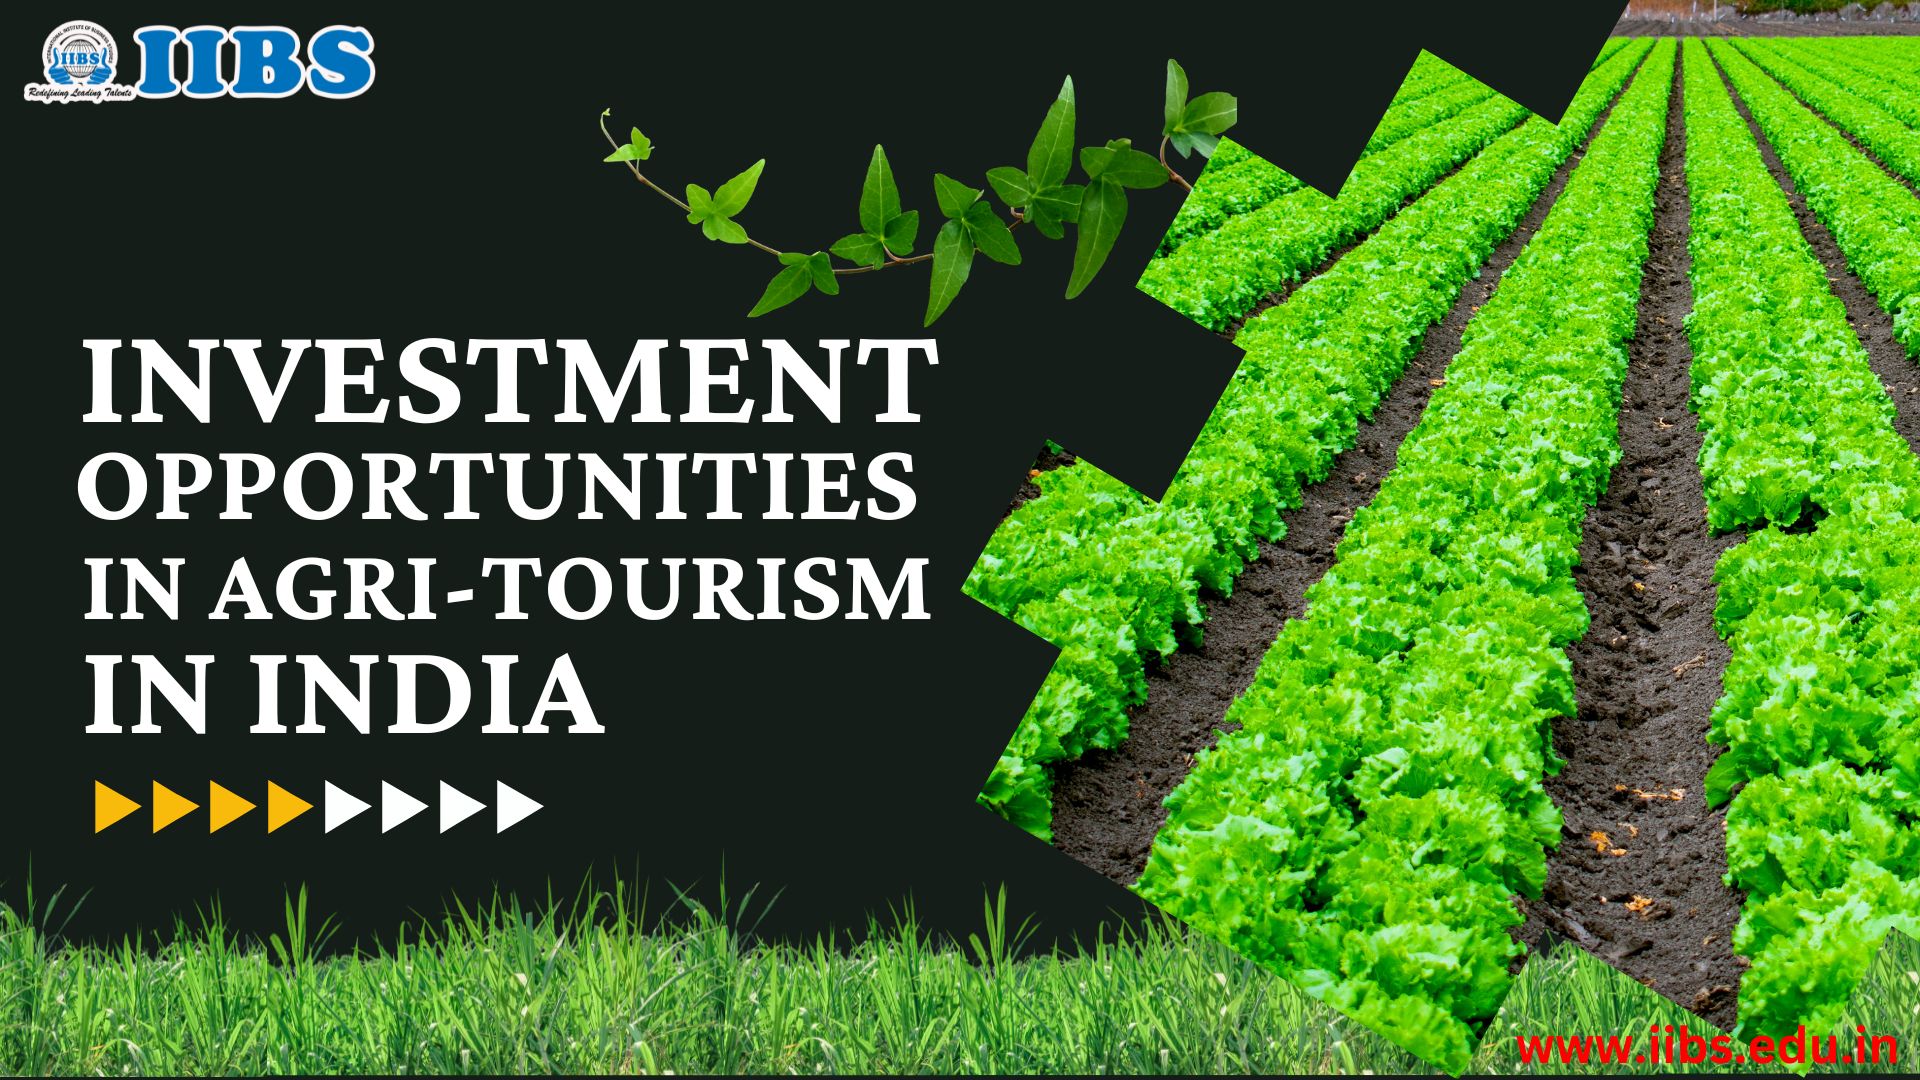 Investment Opportunities in Agri-tourism in India | A++ Rated MBA College in Bangalore